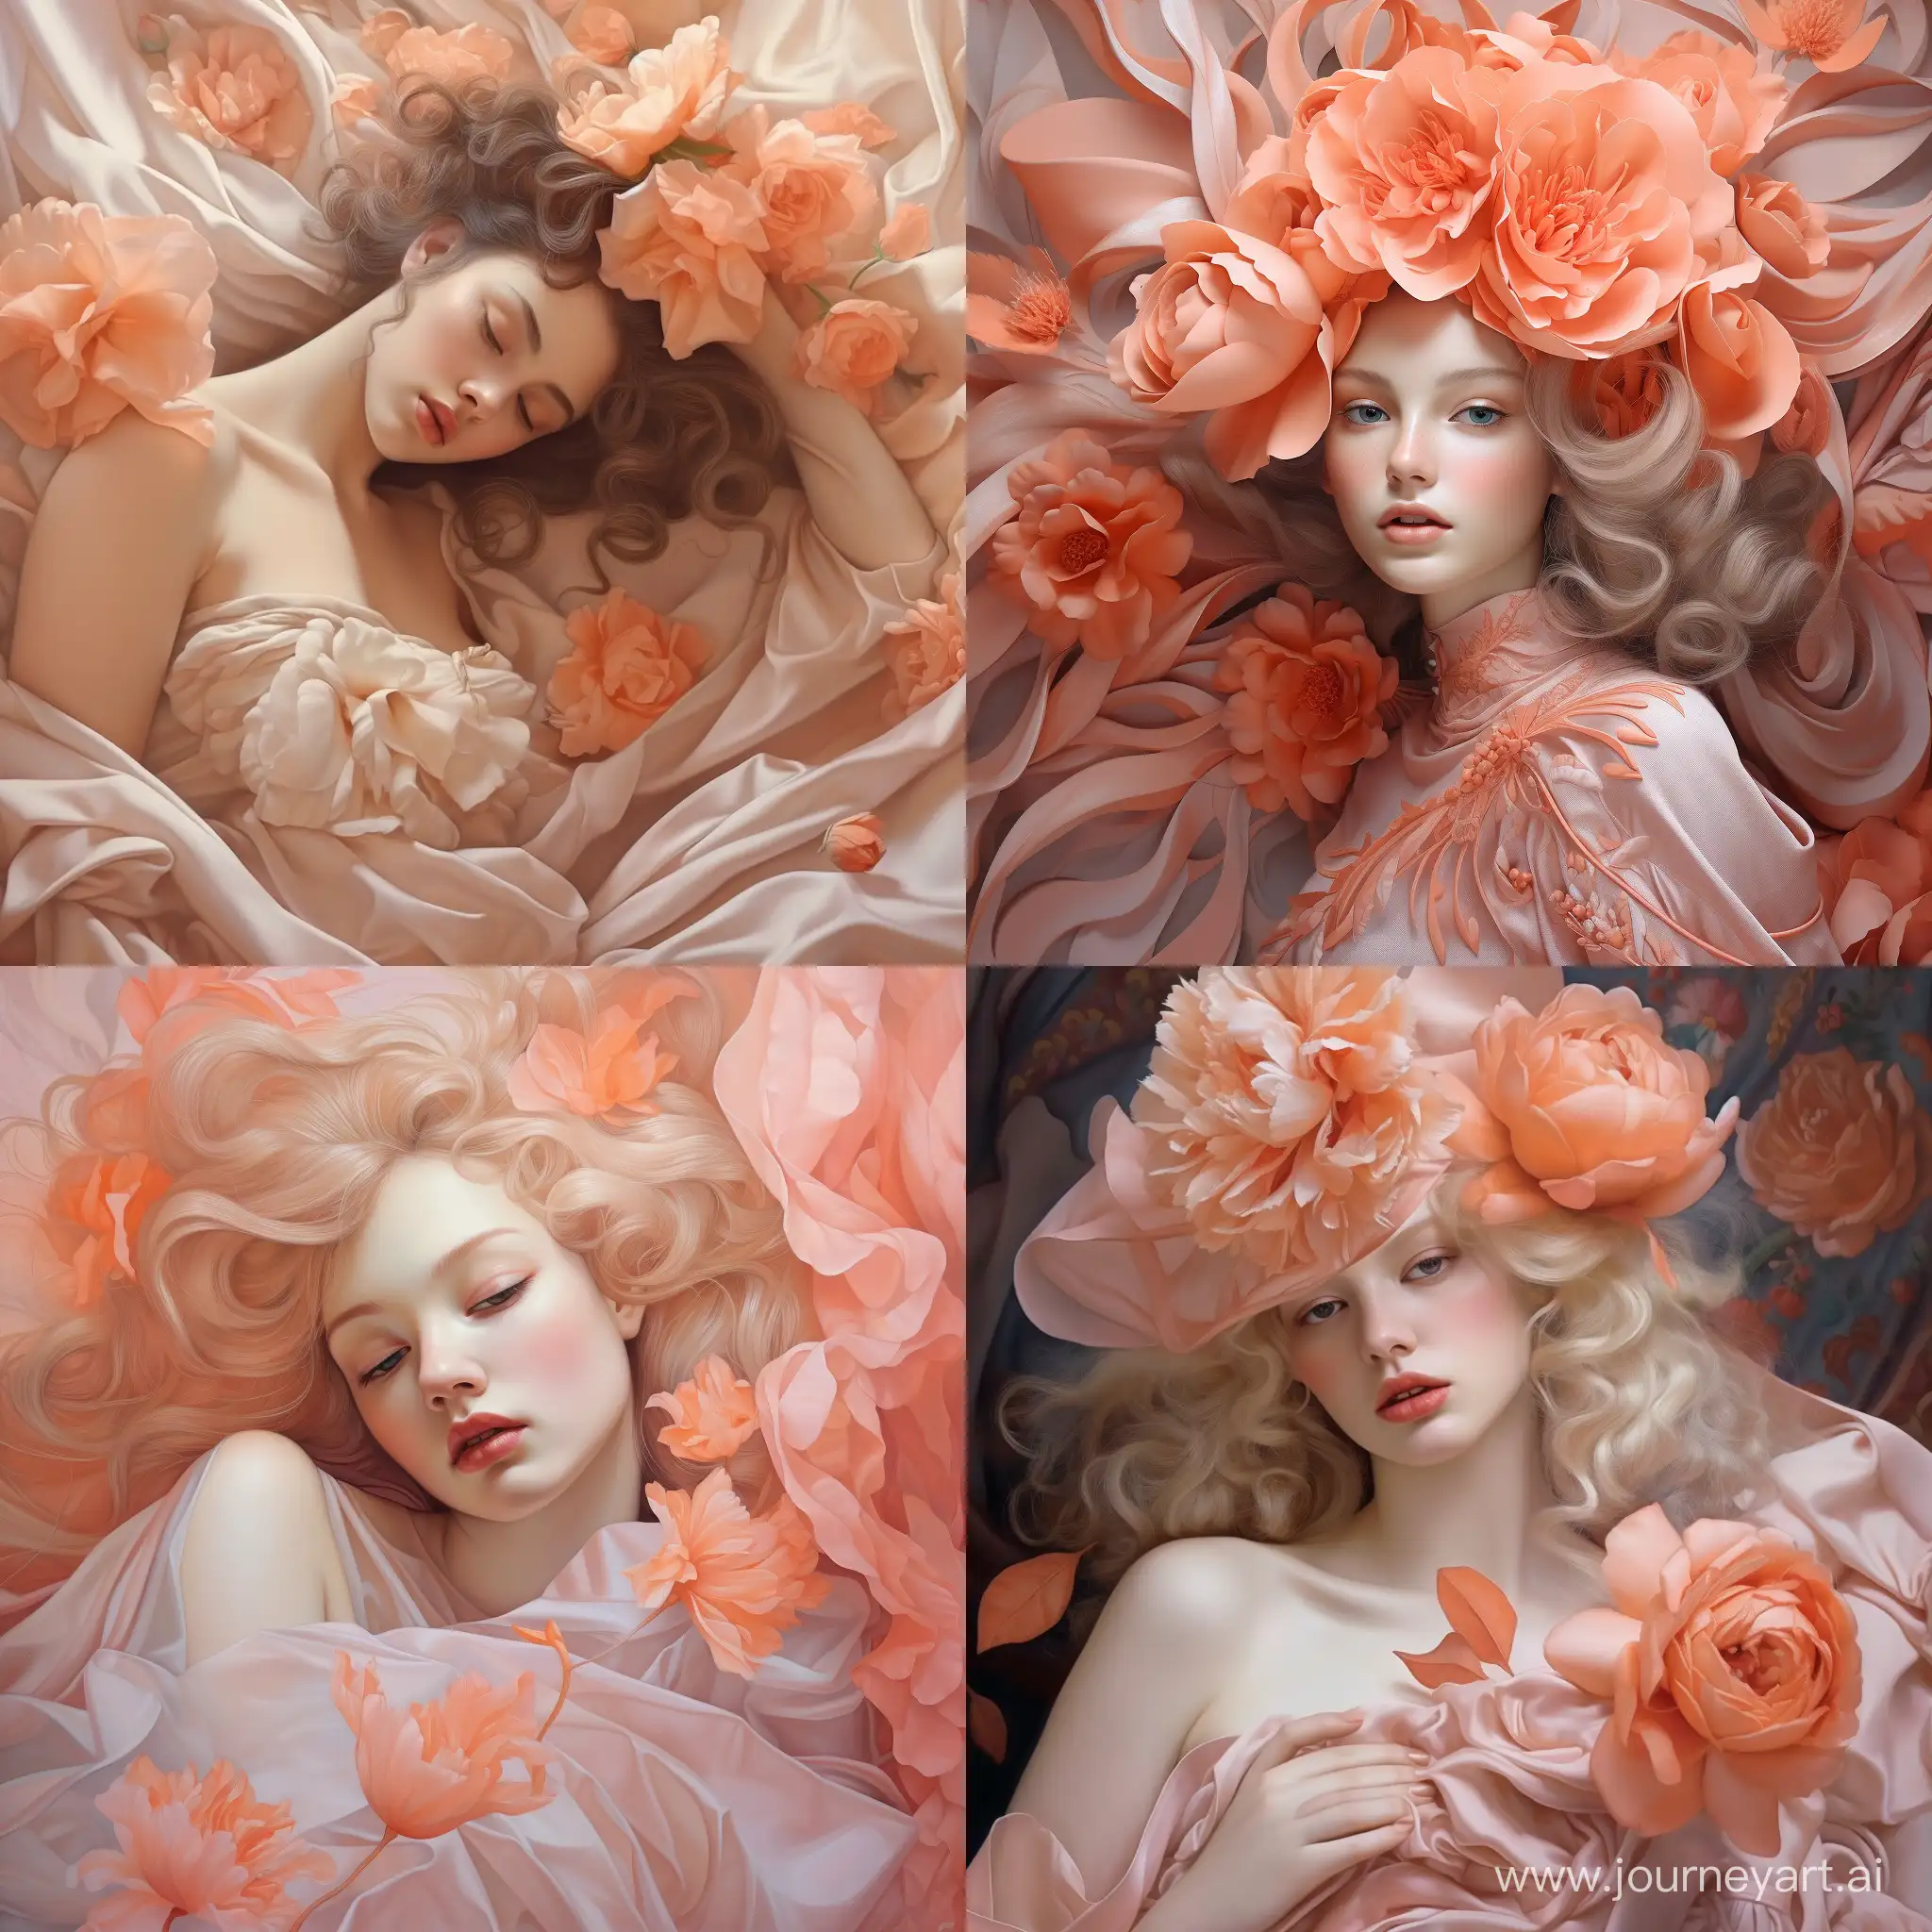 Tender-Moments-Captured-Fantastically-Beautiful-Expressions-in-Peach-Tones